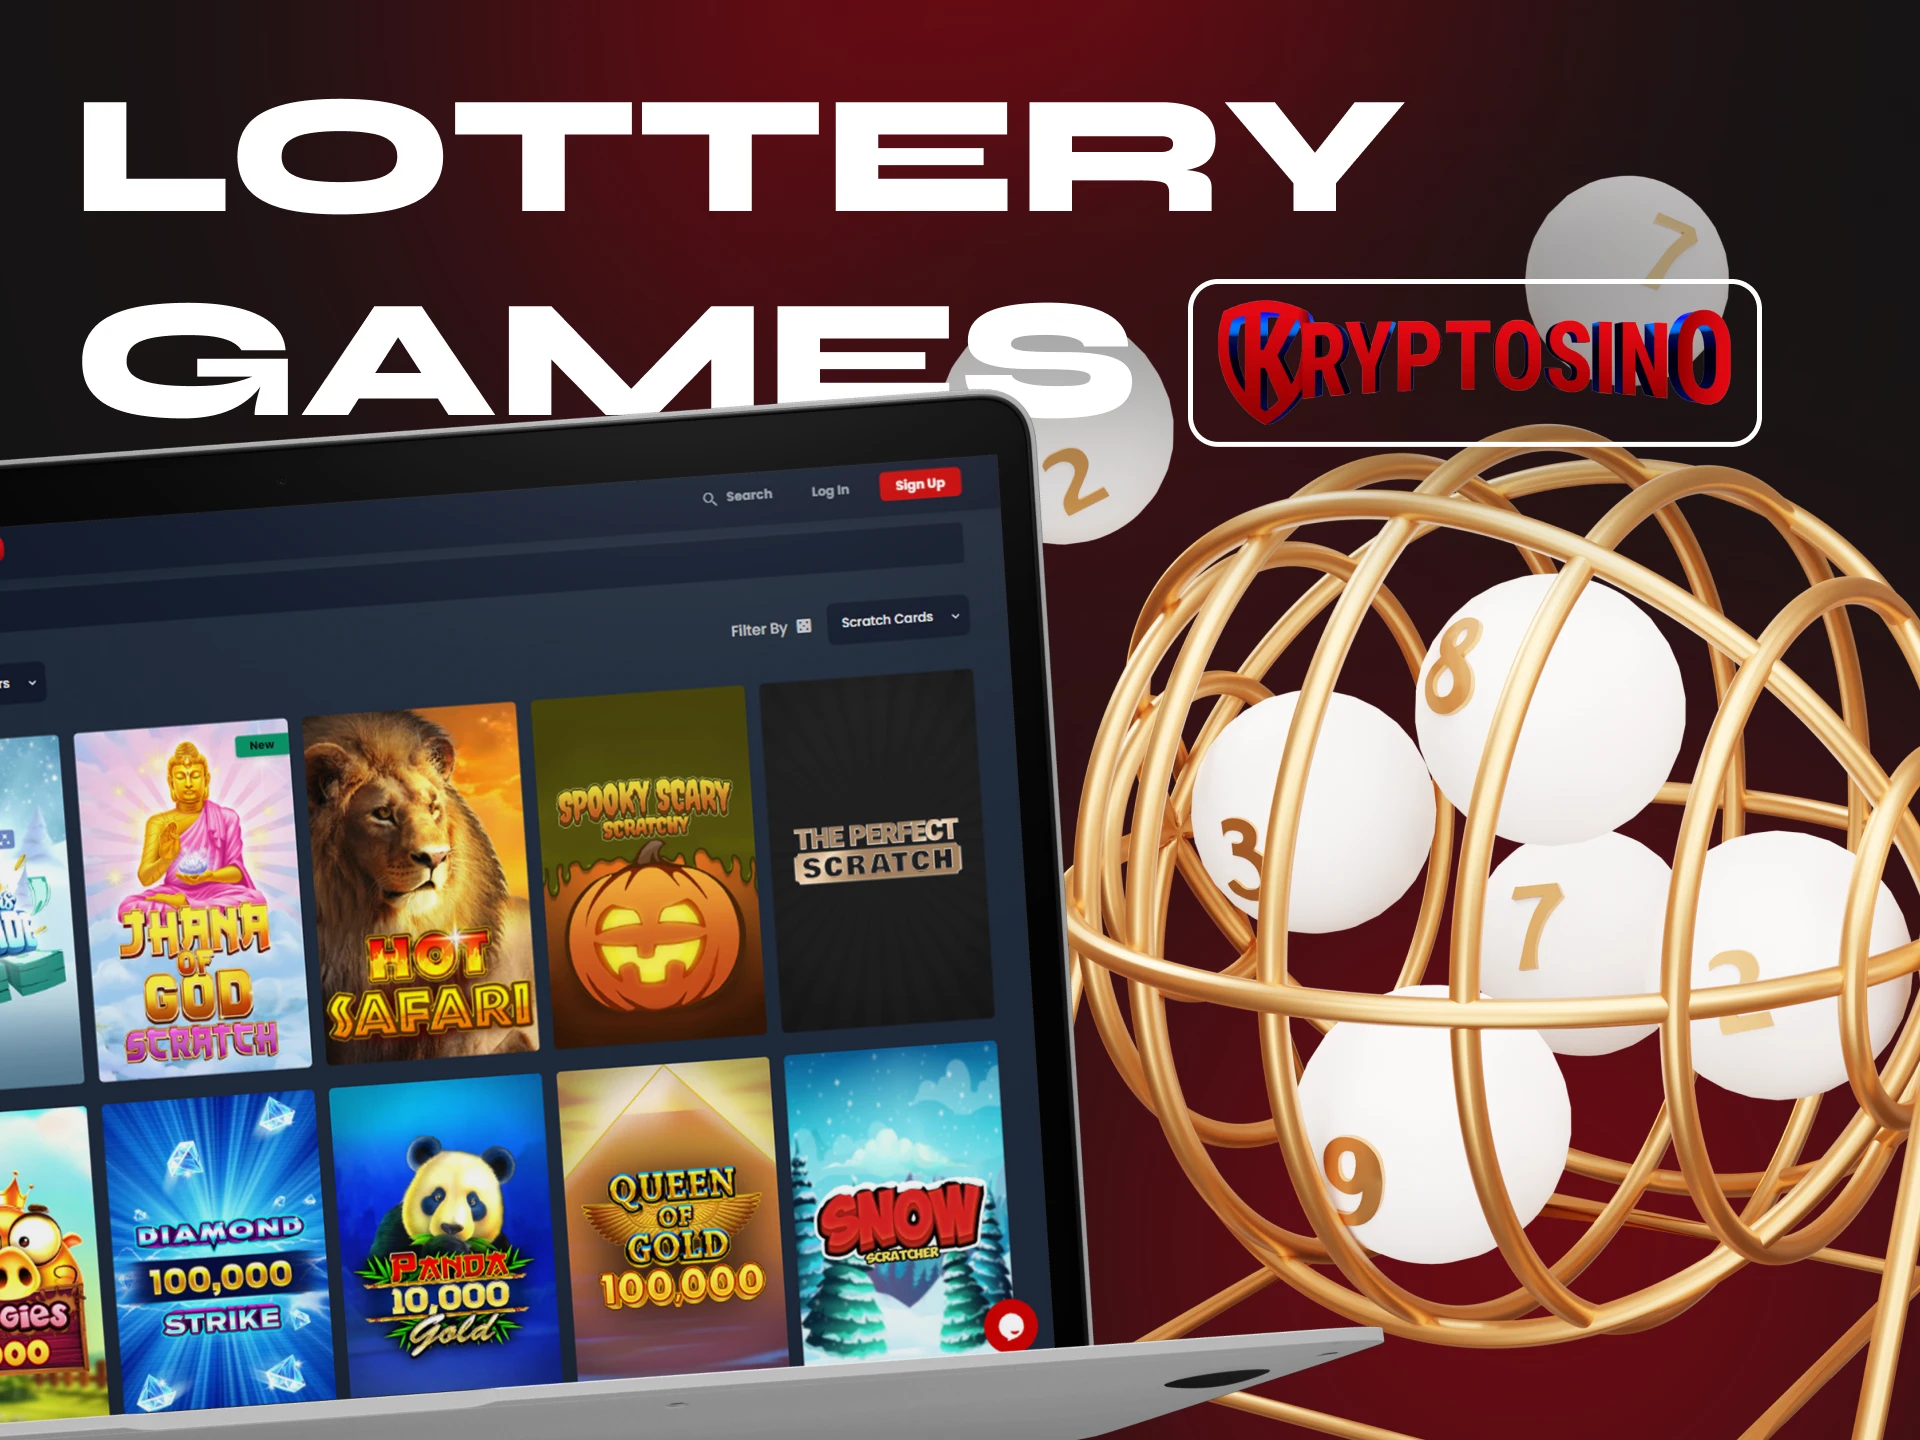 Play the lottery and get an unforgettable experience at Kryptosino Casino.